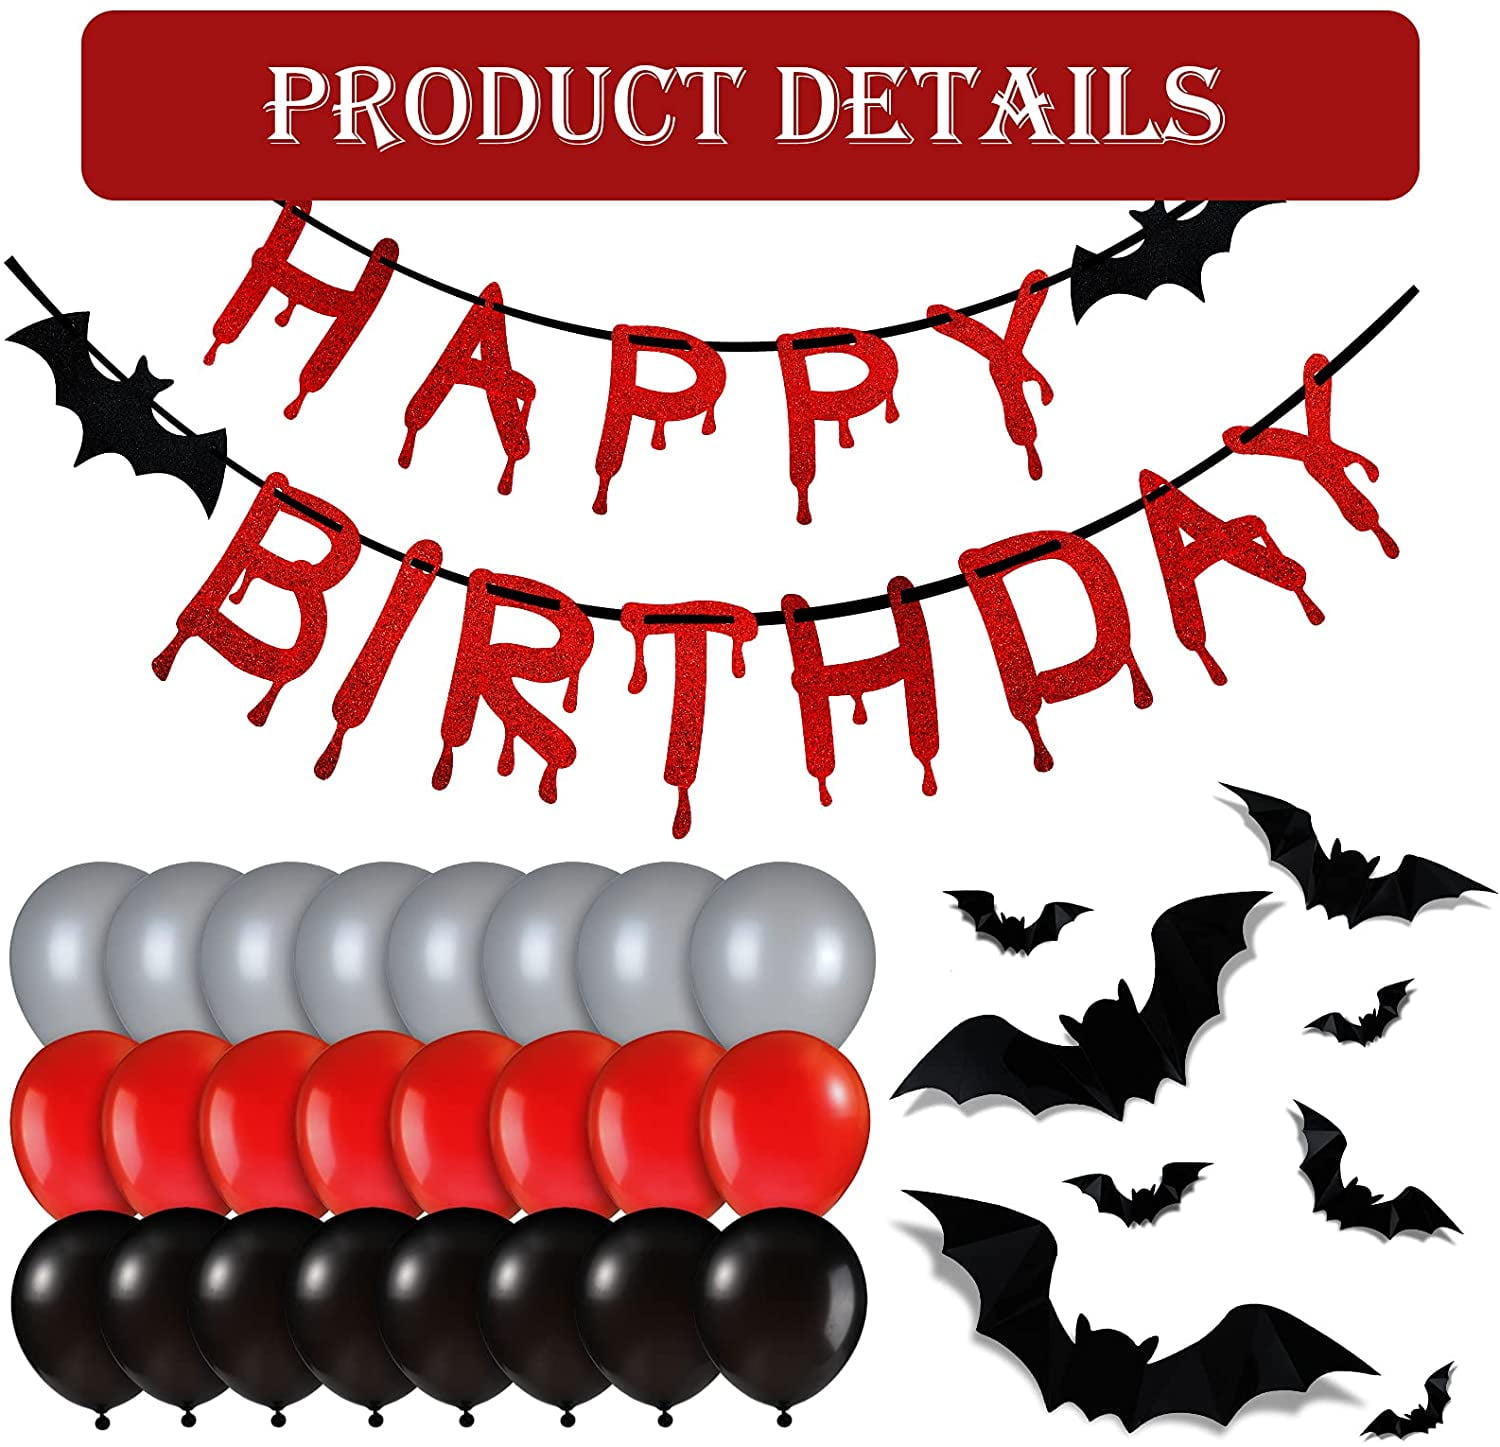 Red&Black Glittery Happy Birthday Banners with Bloody Weapons,Vampire Diaries Party Decorations,Scar Halloween Decorations Birthday Party,Halloween Birthday Supplies Happy Birthday Banner Halloween